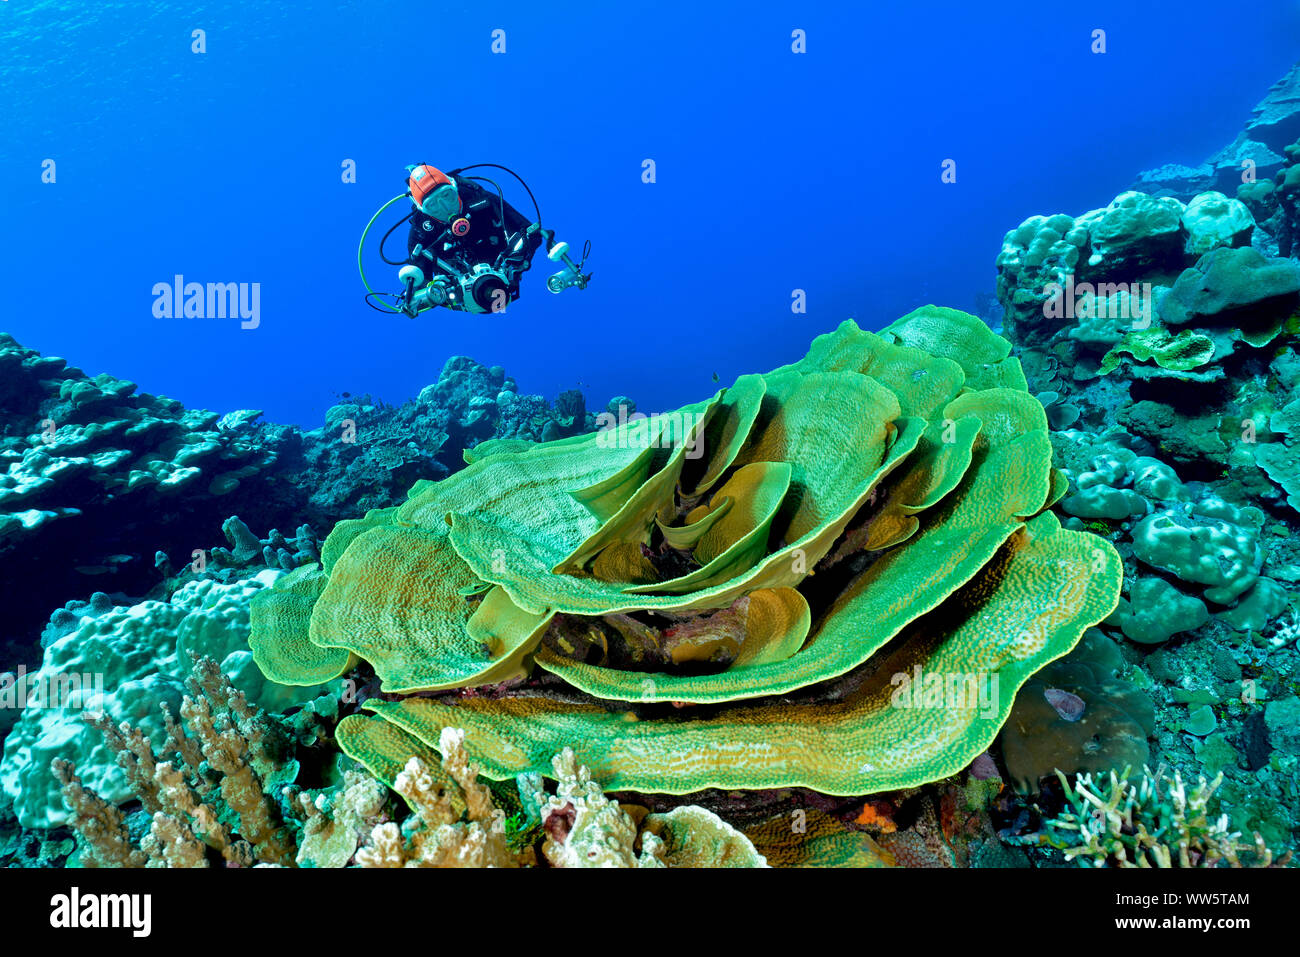 Climate change, coral bleaching, intact coral in the midst of dead corals, Pacific Ocean, Stock Photo